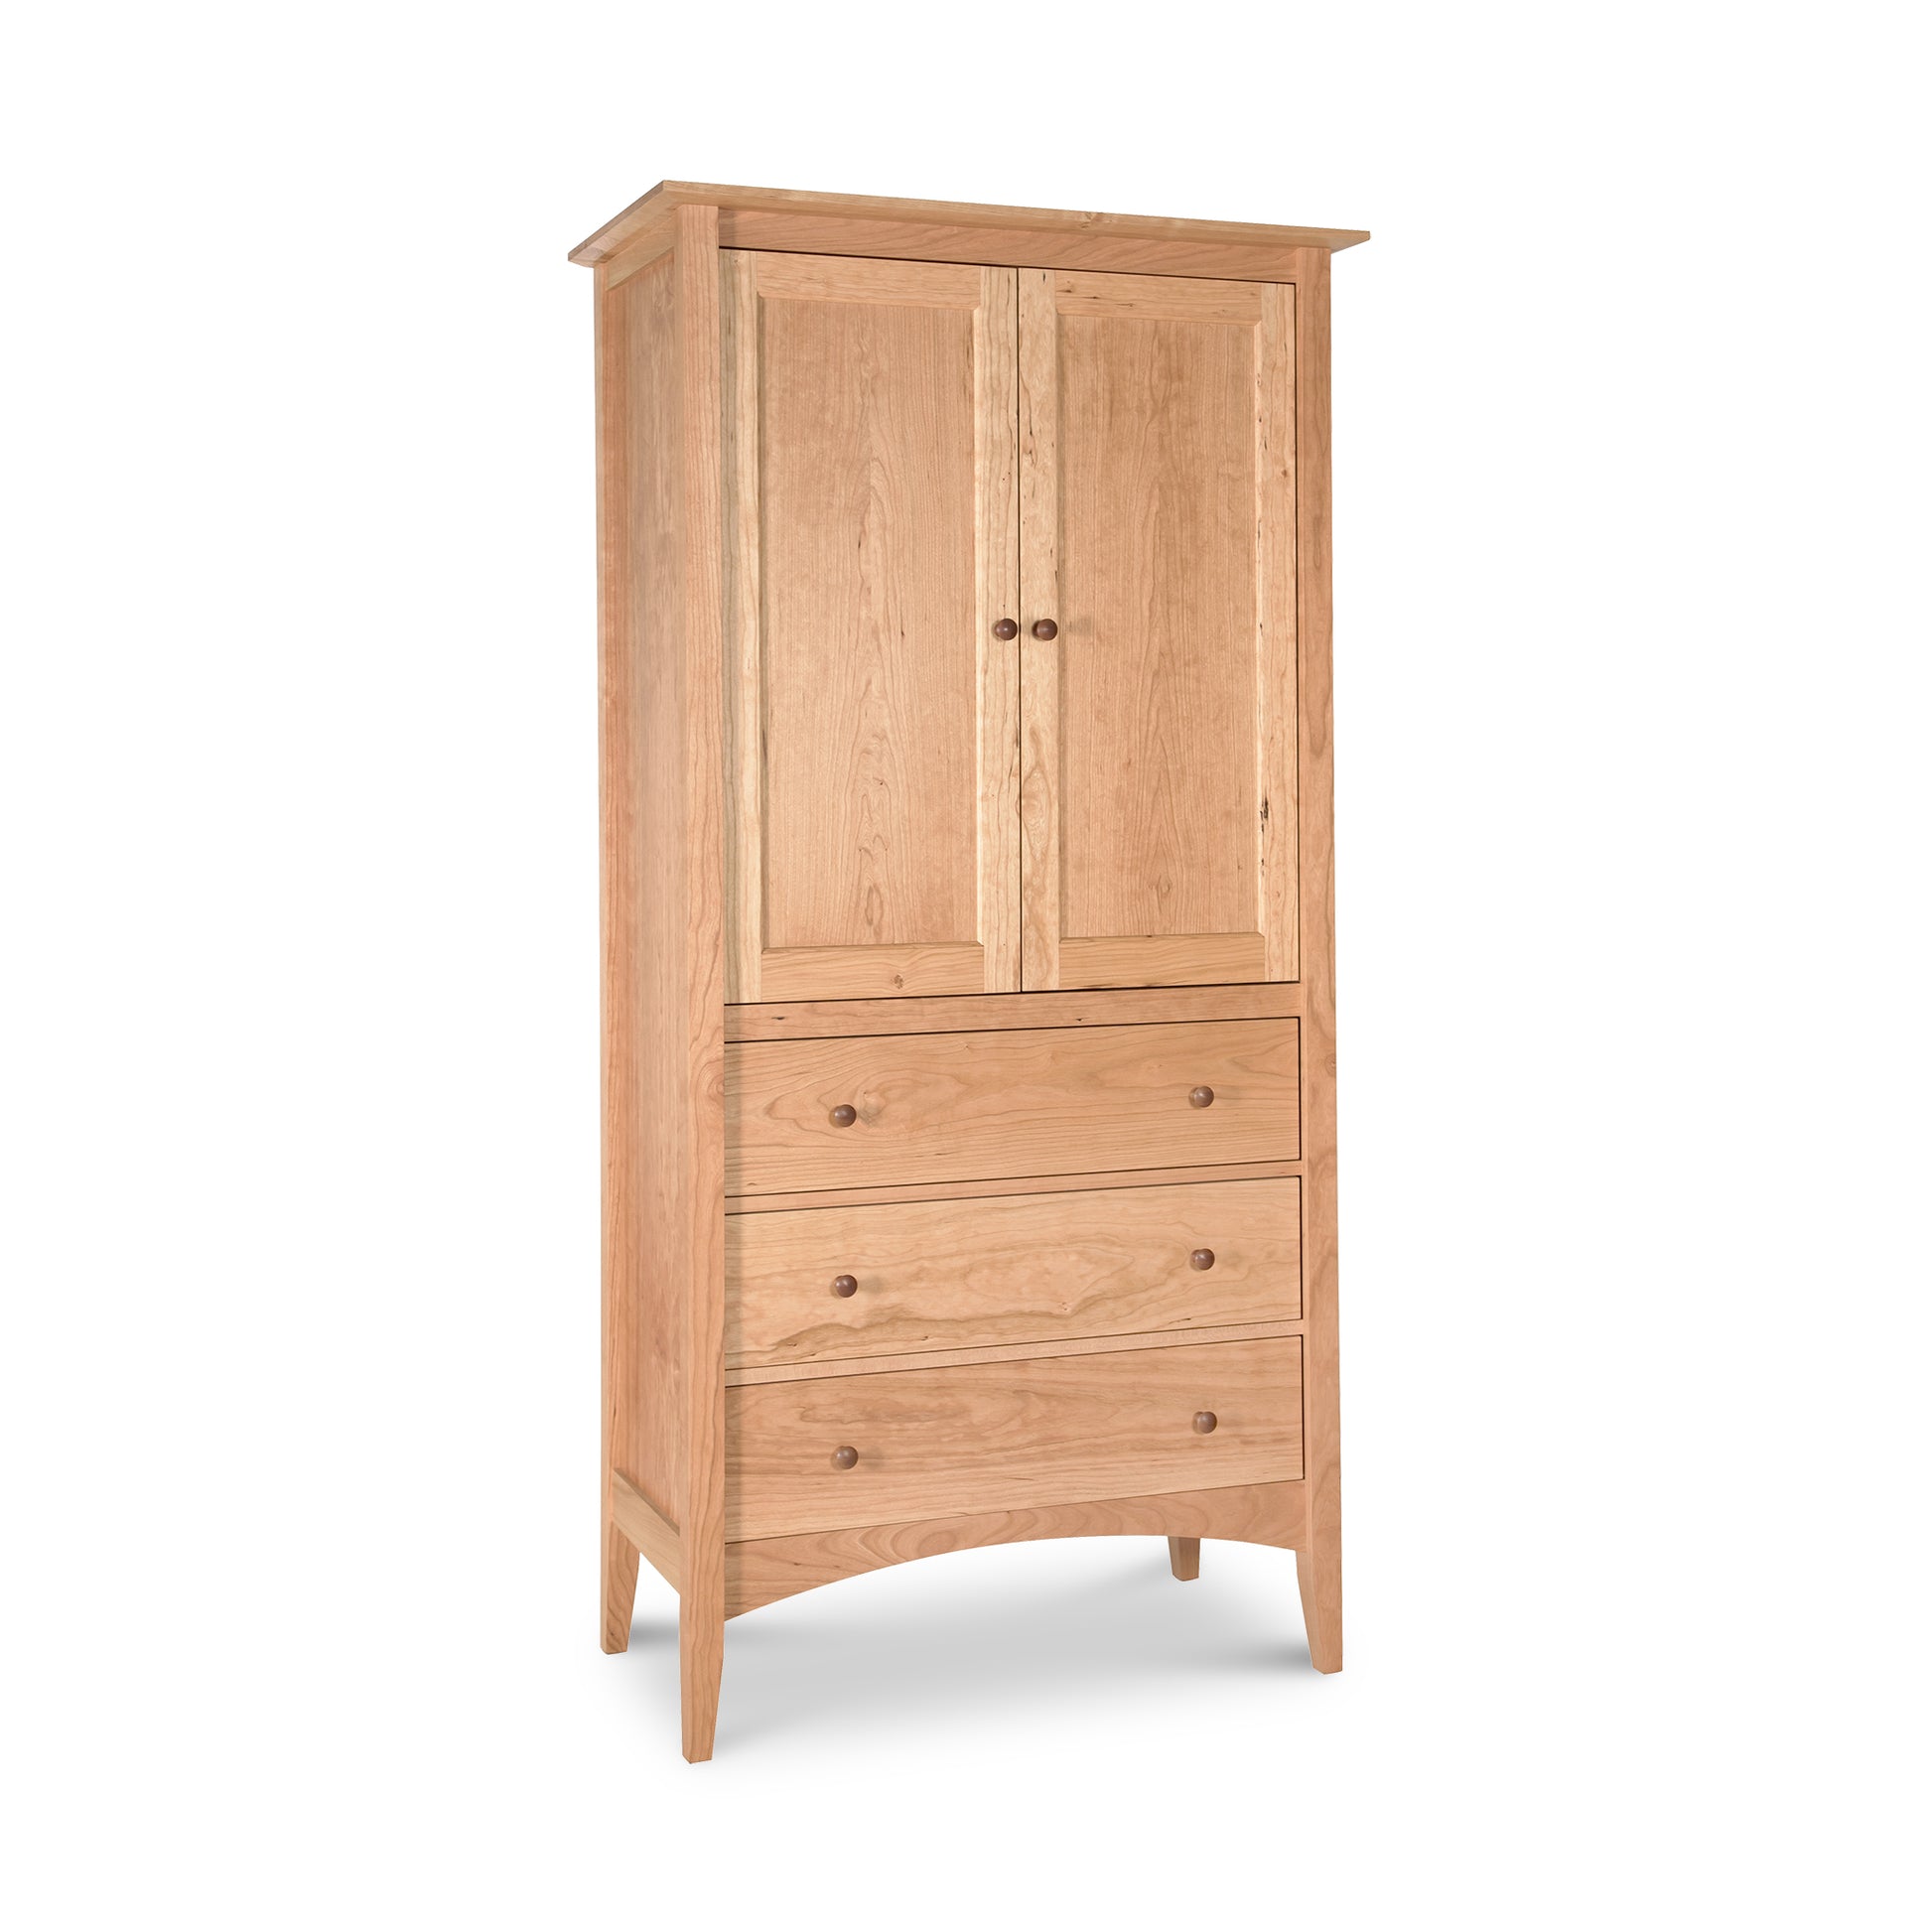 A Maple Corner Woodworks American Shaker Armoire with an upper cabinet section featuring double doors and a lower section with four drawers, set against a white background.